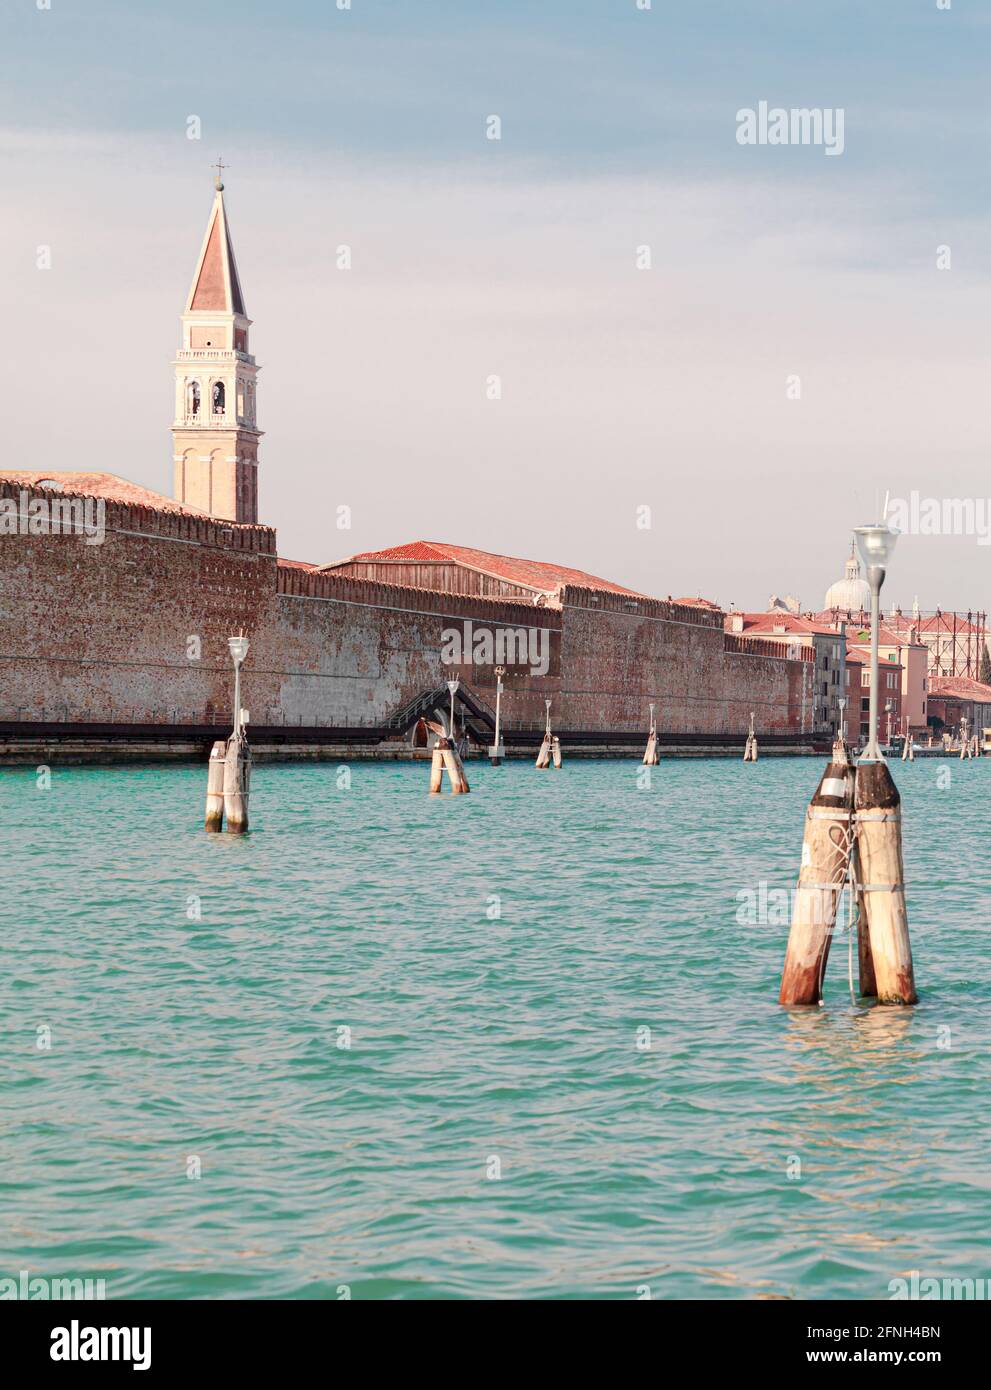 A view of the Venice lagoon Stock Photo